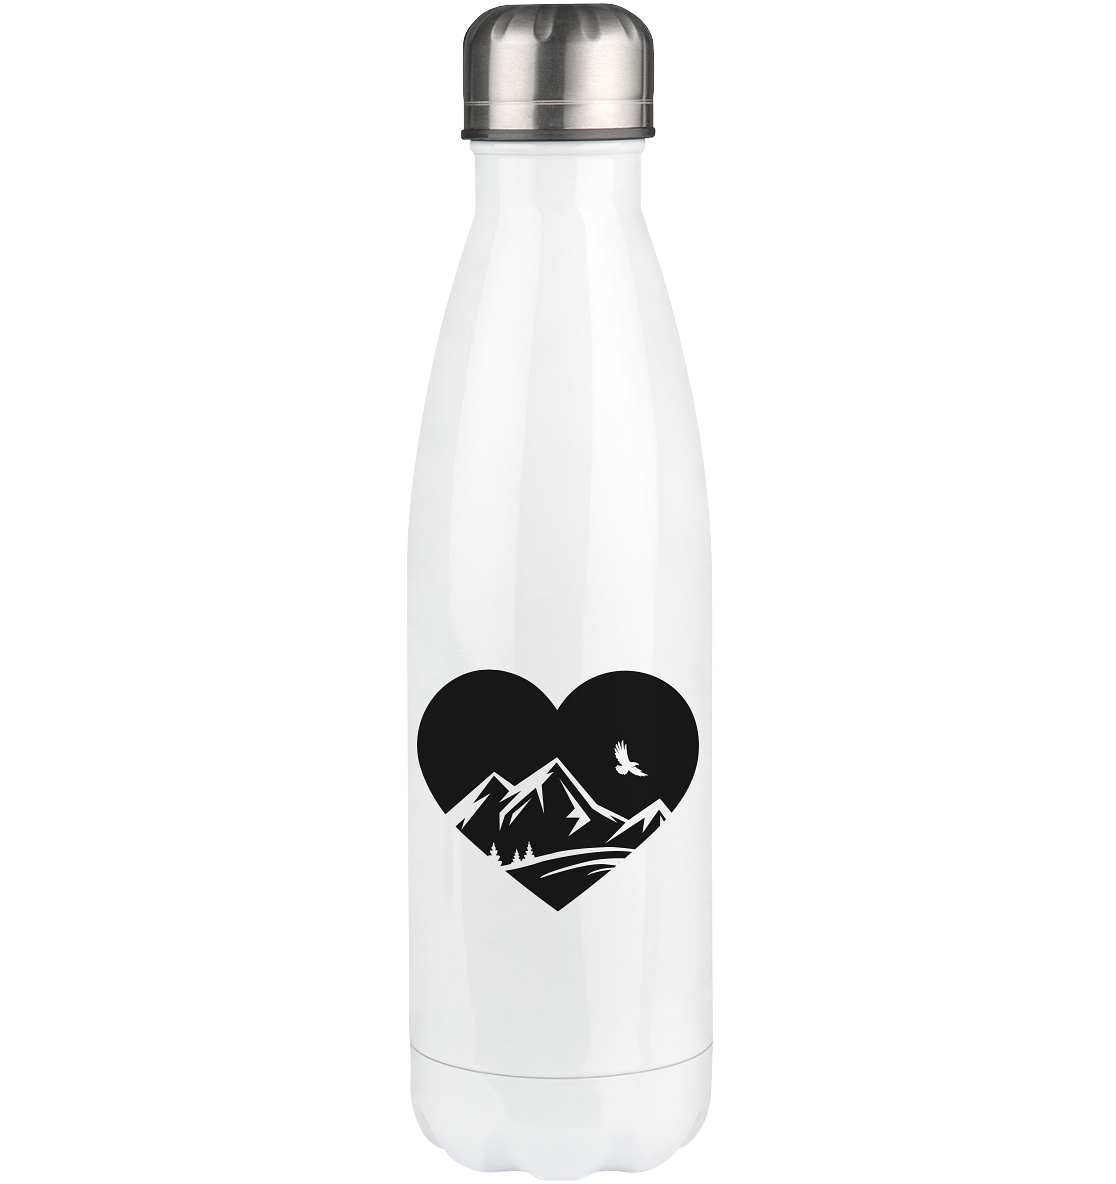 Heart 1 and Mountain - Edelstahl Thermosflasche berge 500ml